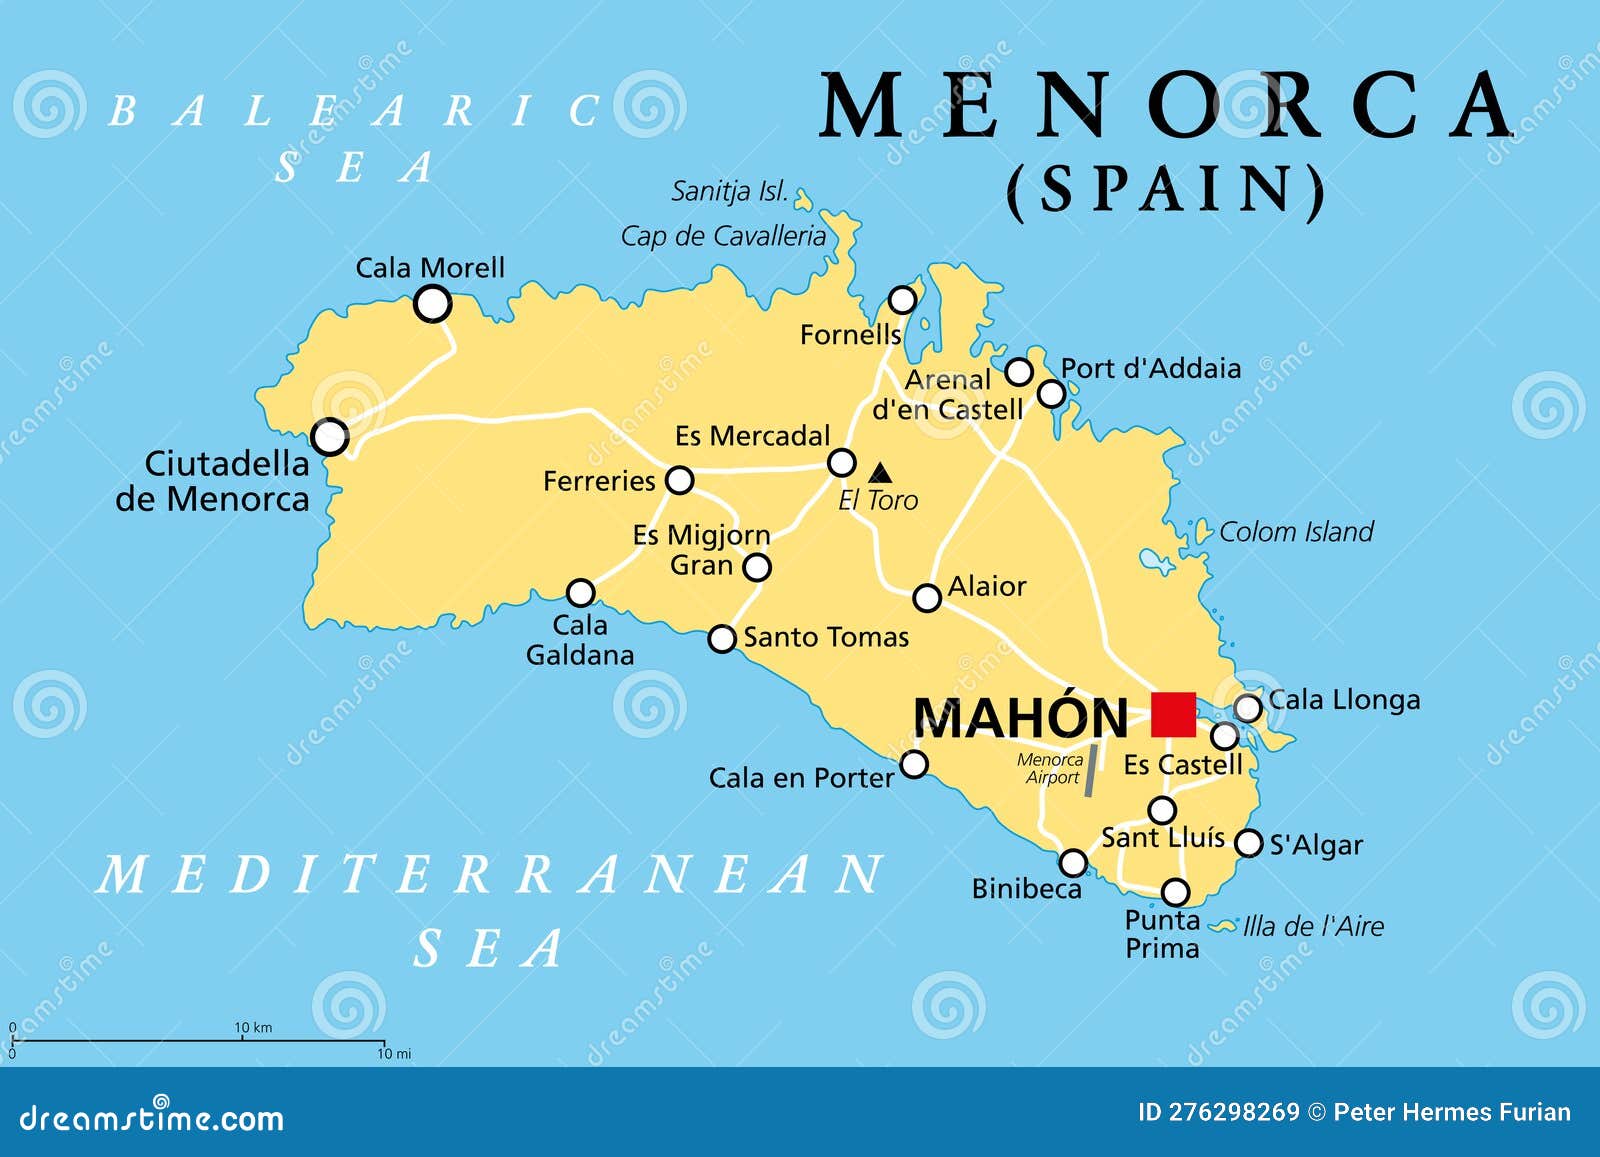 menorca, or minorca, political map, with the capital mahon